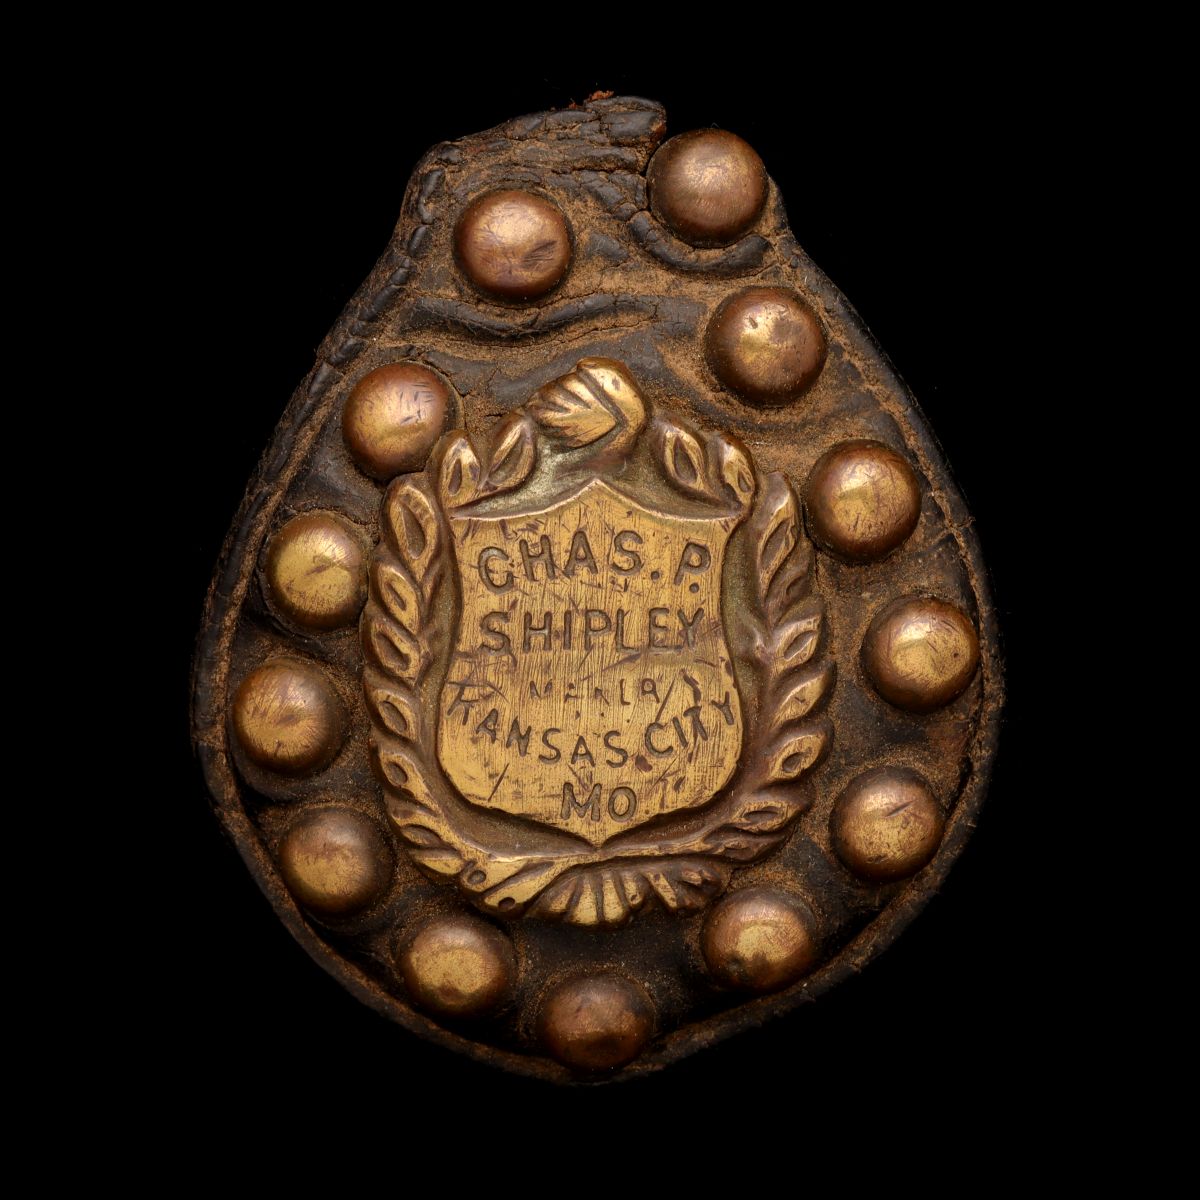 A CHAS P. SHIPLEY BRASS MOUNTED MAKER'S TAG